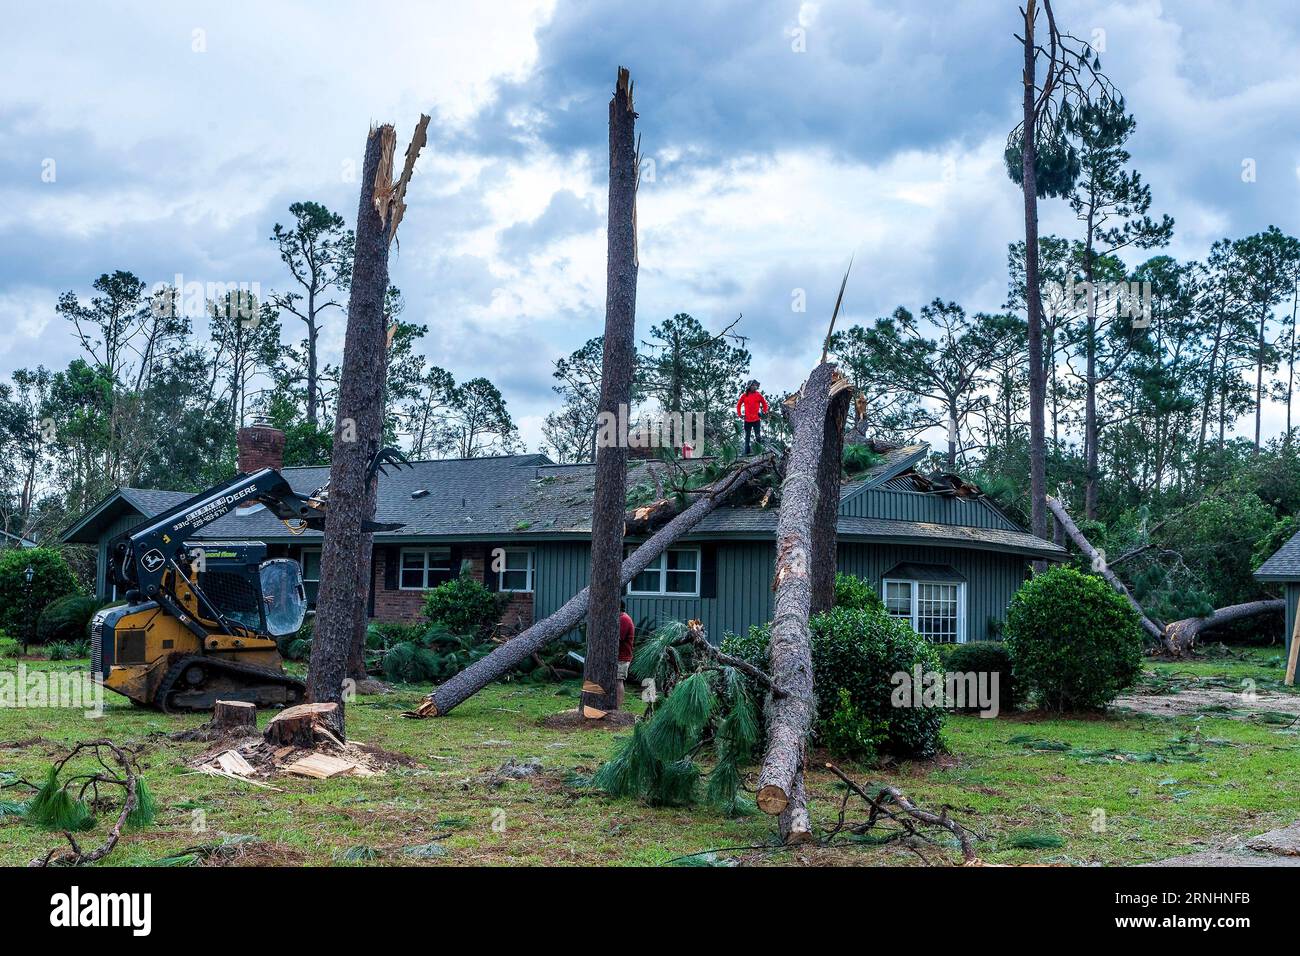 Perry, United States. 01st Sep, 2023. FEMA workers assist in removing fallen trees from a home in the aftermath of Hurricane Idalia, September 1, 2023 in Perry, Florida. The small town of 7,000 was pummeled by Hurricane Idalia shredding trees and destroying homes. Credit: Steve Zumwalt/FEMA/Alamy Live News Stock Photo